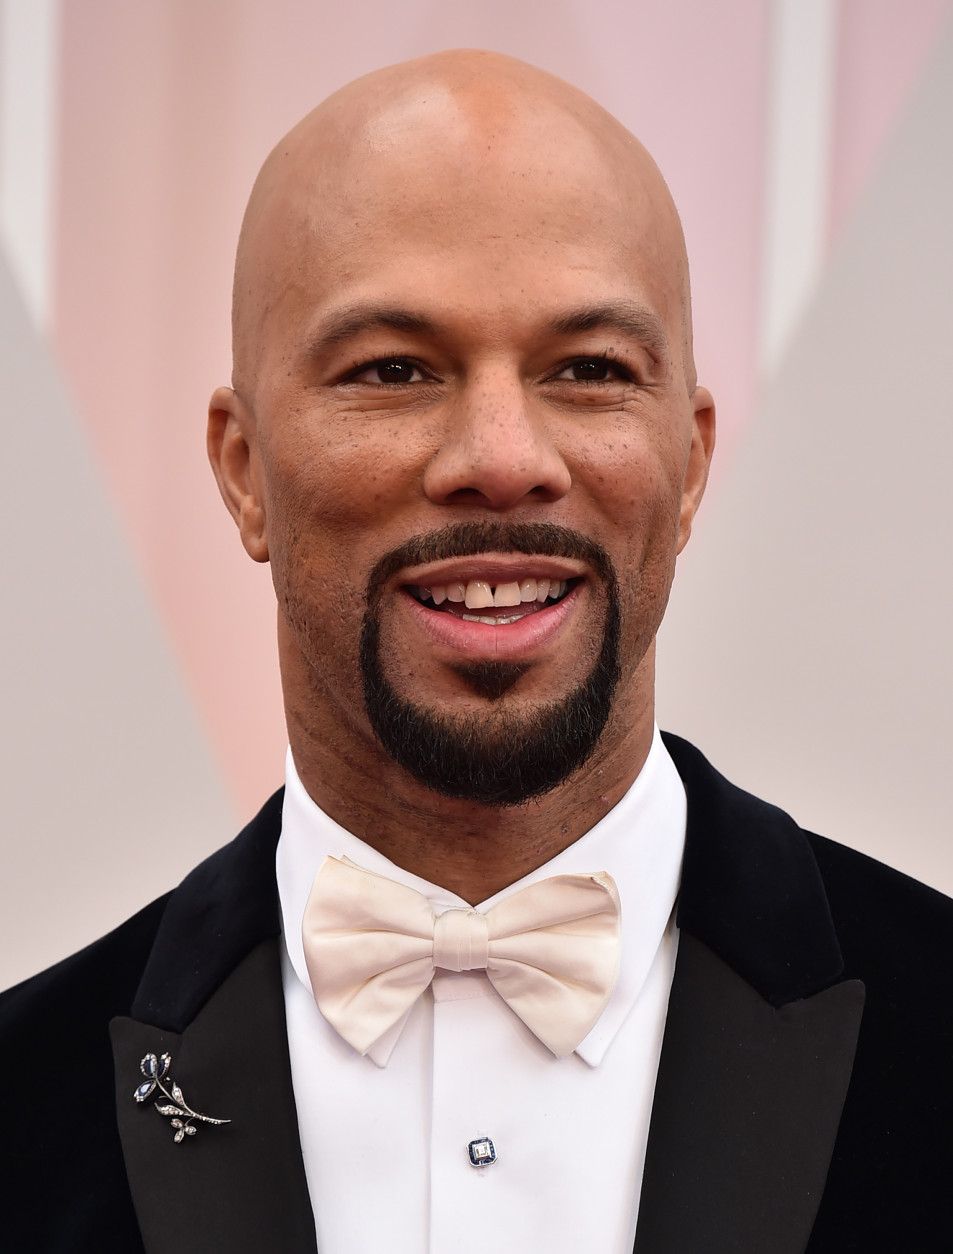 Common arrives at the Oscars on Sunday, Feb. 22, 2015, at the Dolby Theatre in Los Angeles. (Photo by Jordan Strauss/Invision/AP)